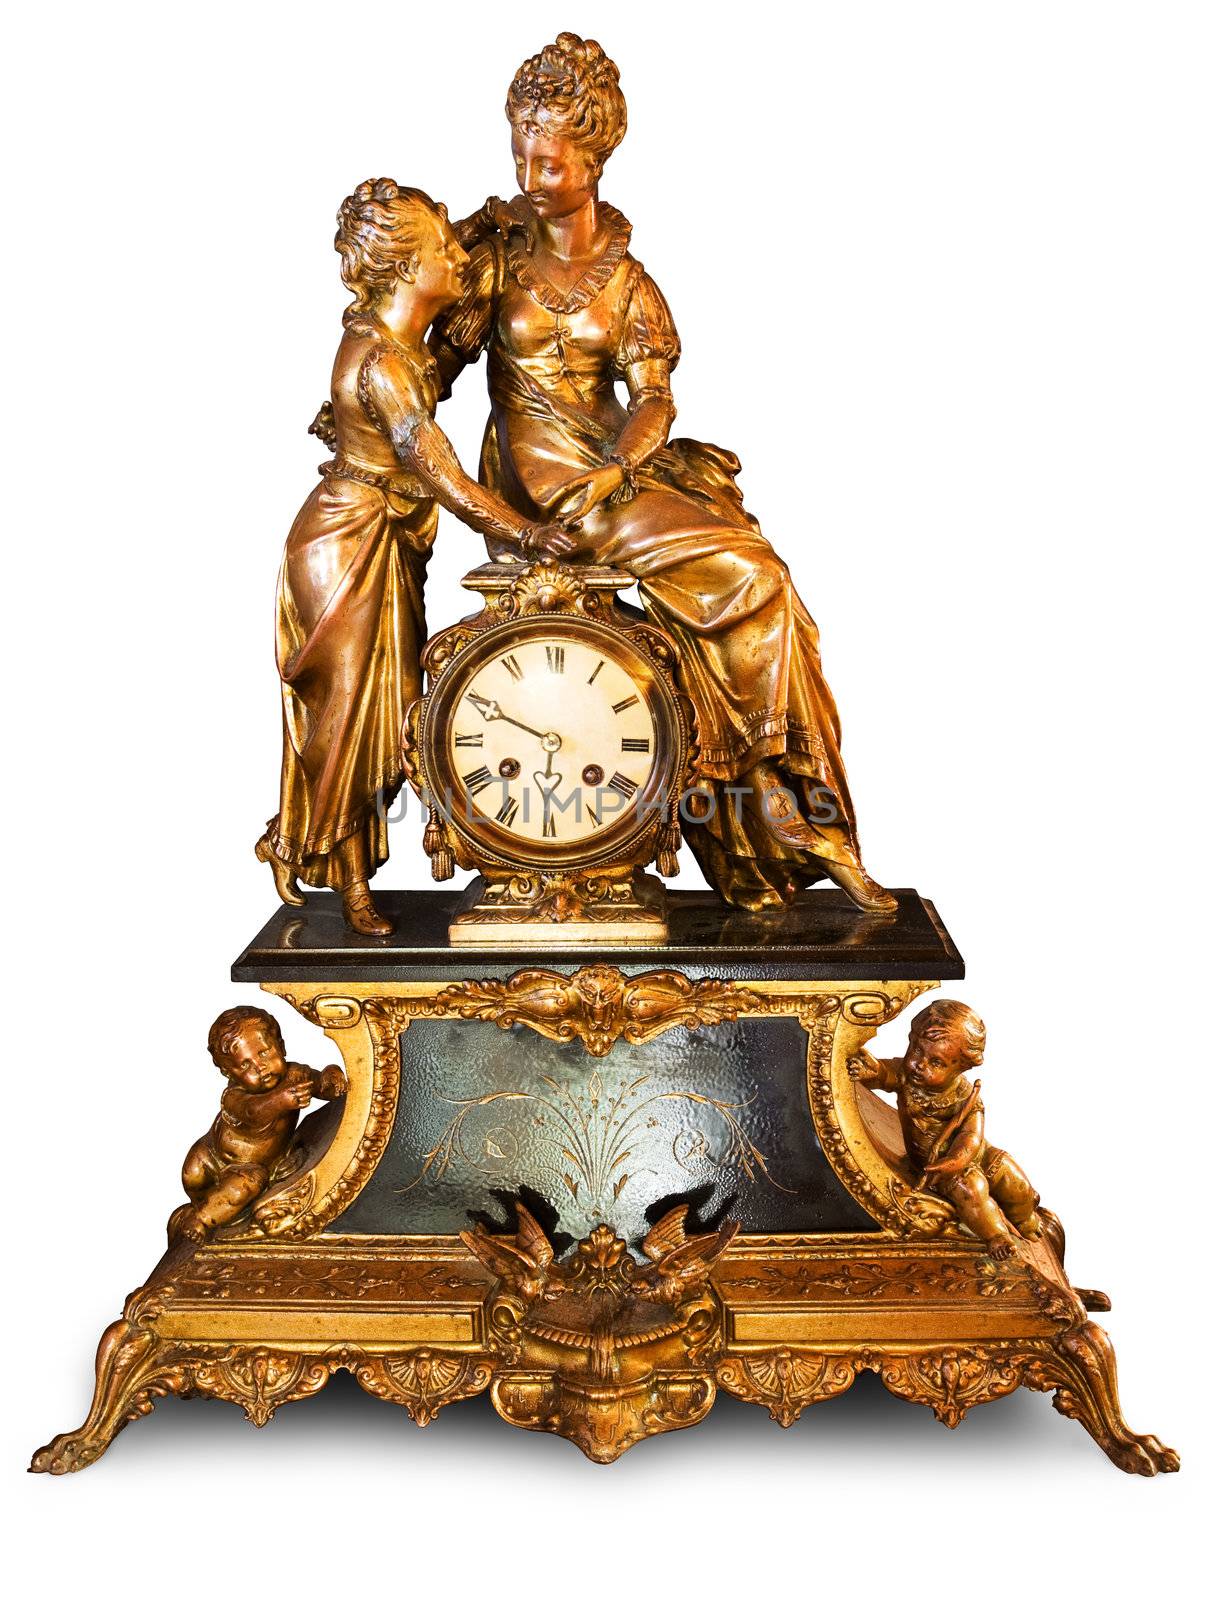 Antique clock with figurines by ints